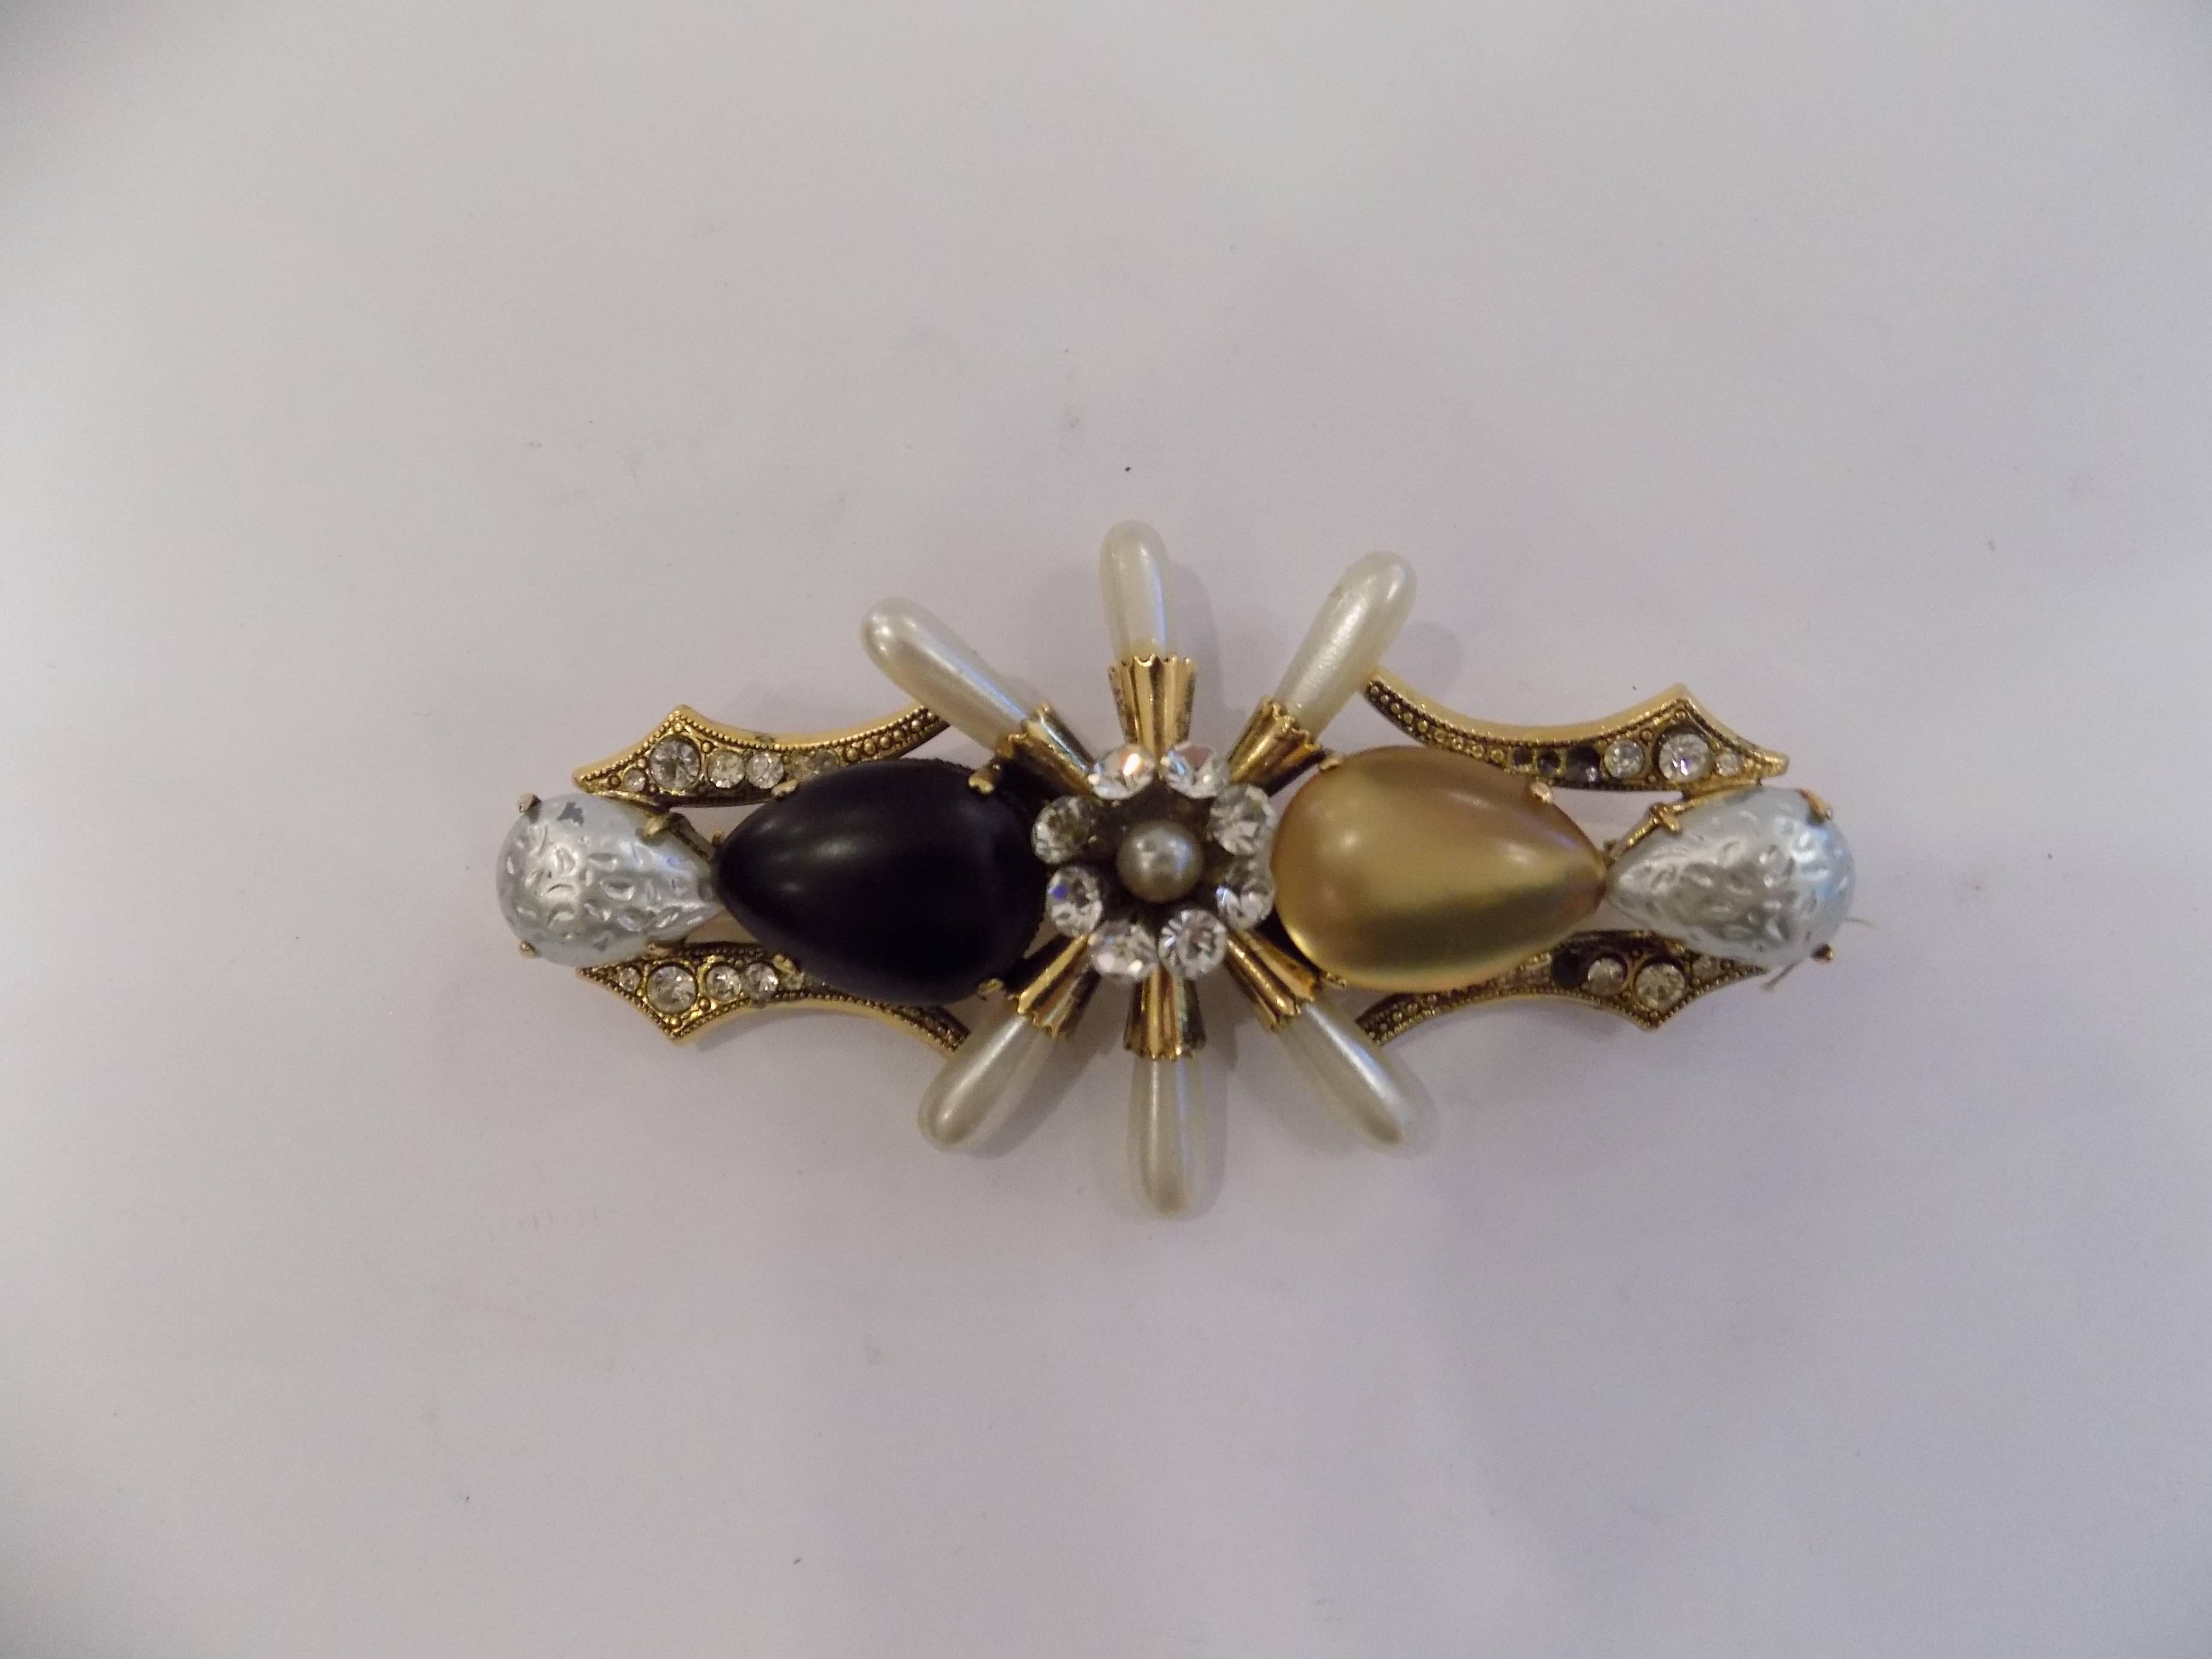 Vintage Pin Brooch Gold tone with Gold, black and crystal stones on it